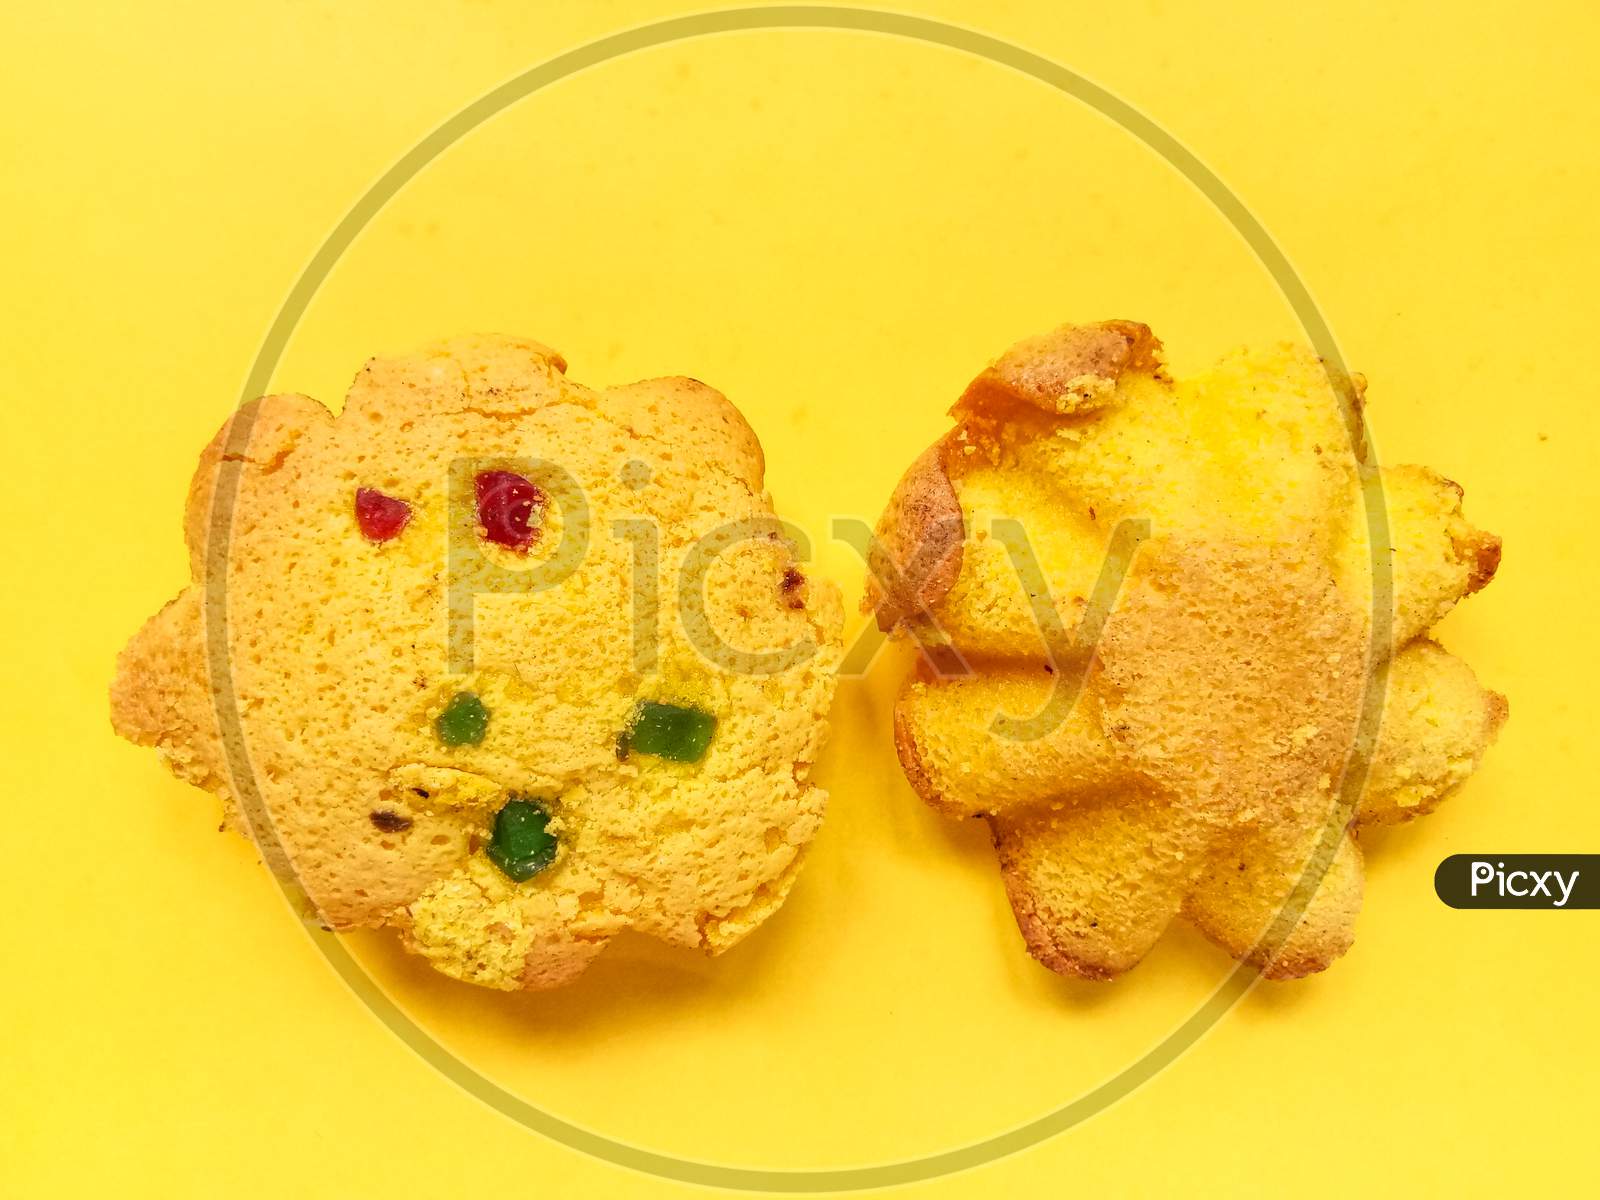 Yellow star shaped cakes in yellow background